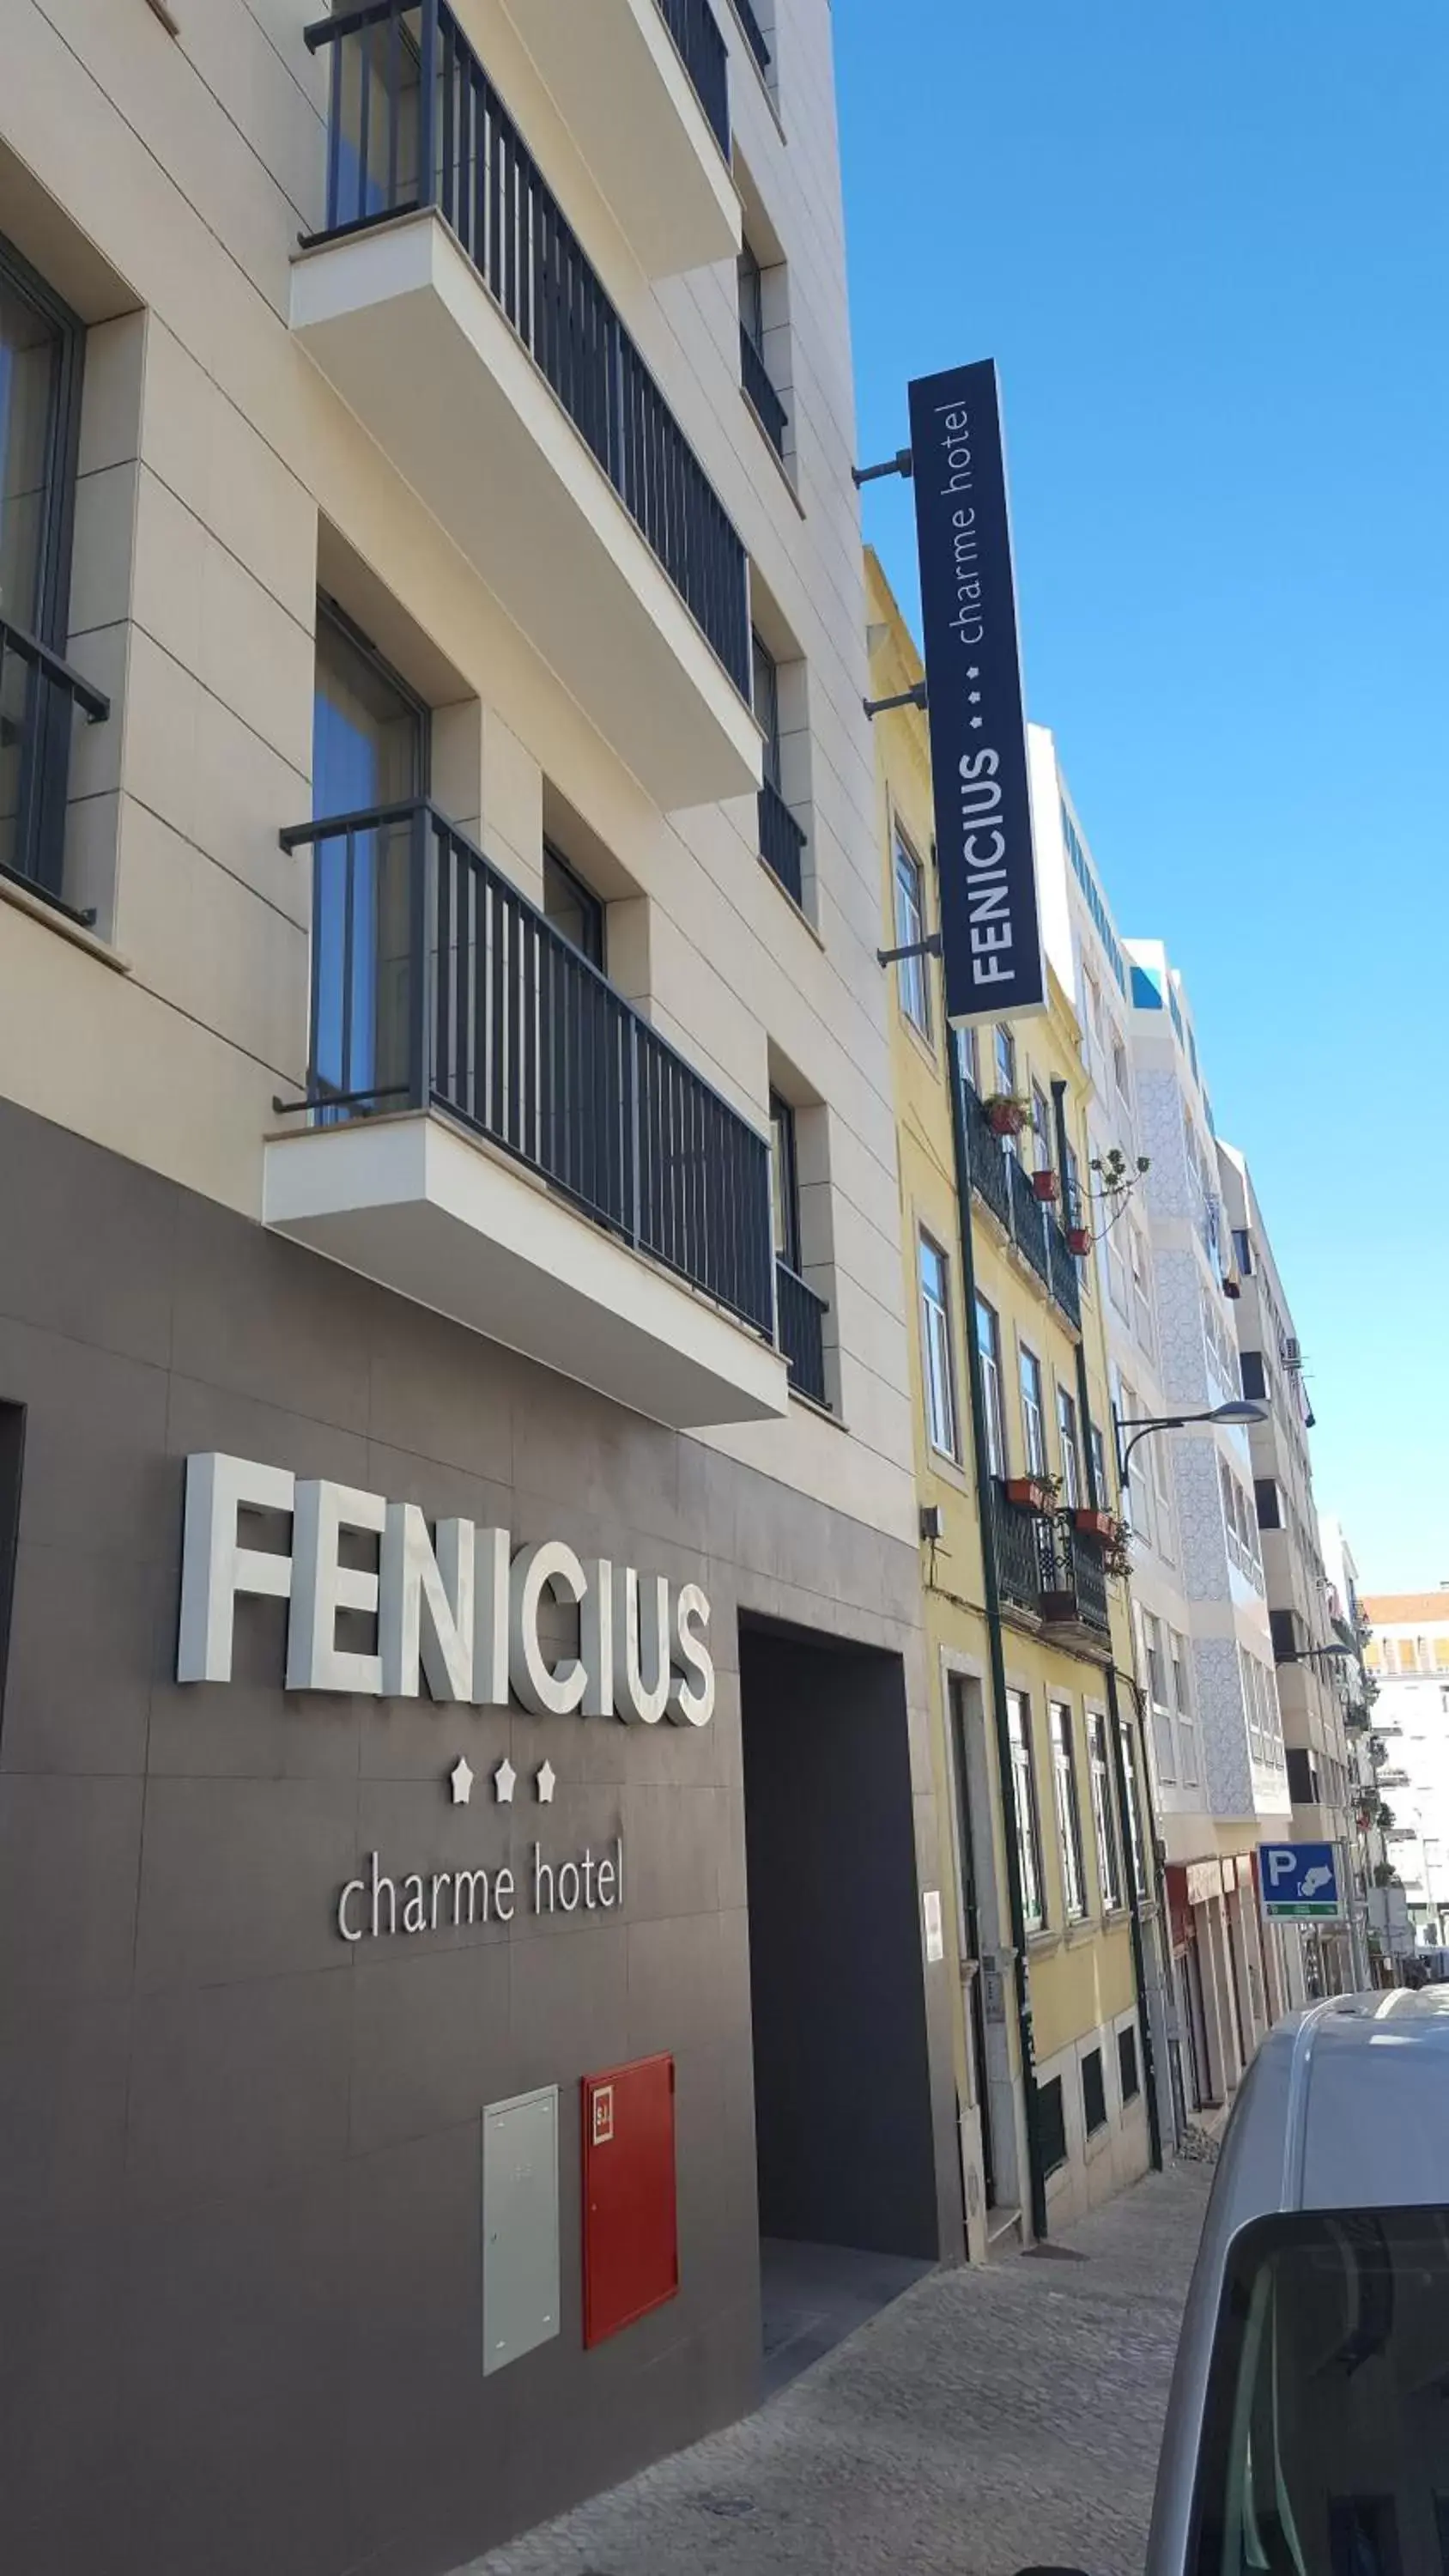 Property Building in Fenicius Charme Hotel